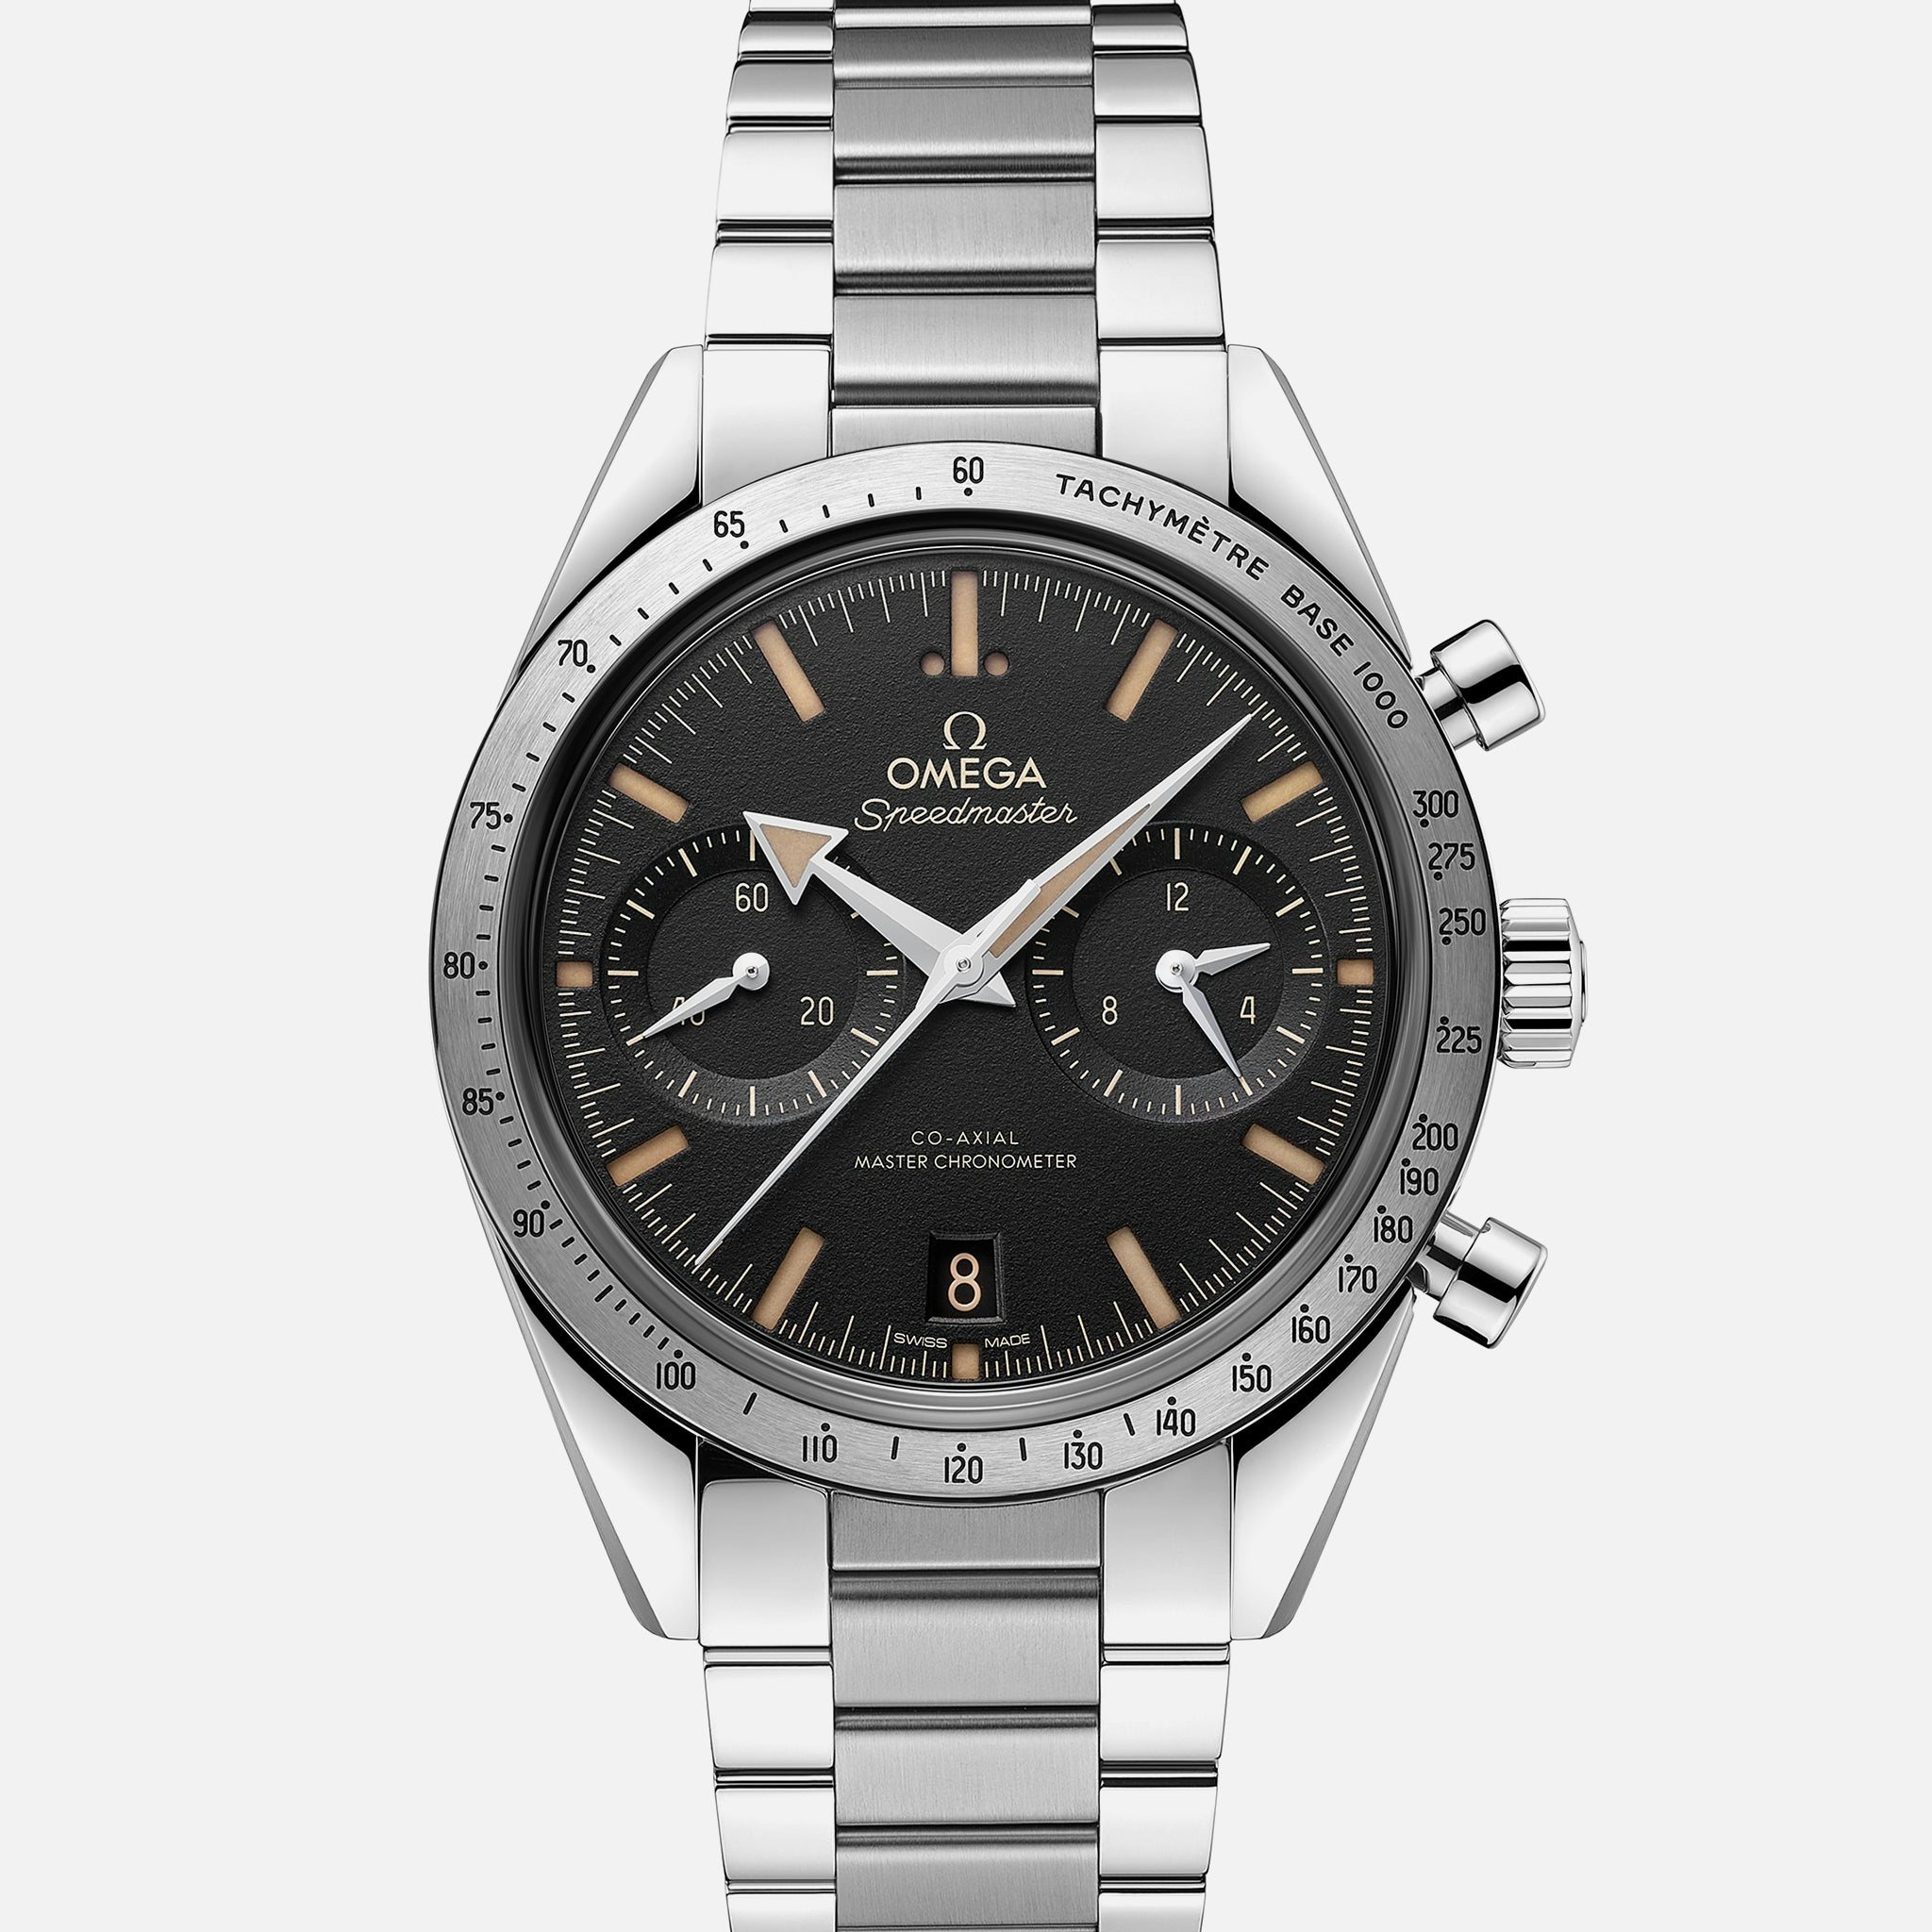 Round Omega Speedmaster Watch For Personal Use, Model Name/Number: 455 B1